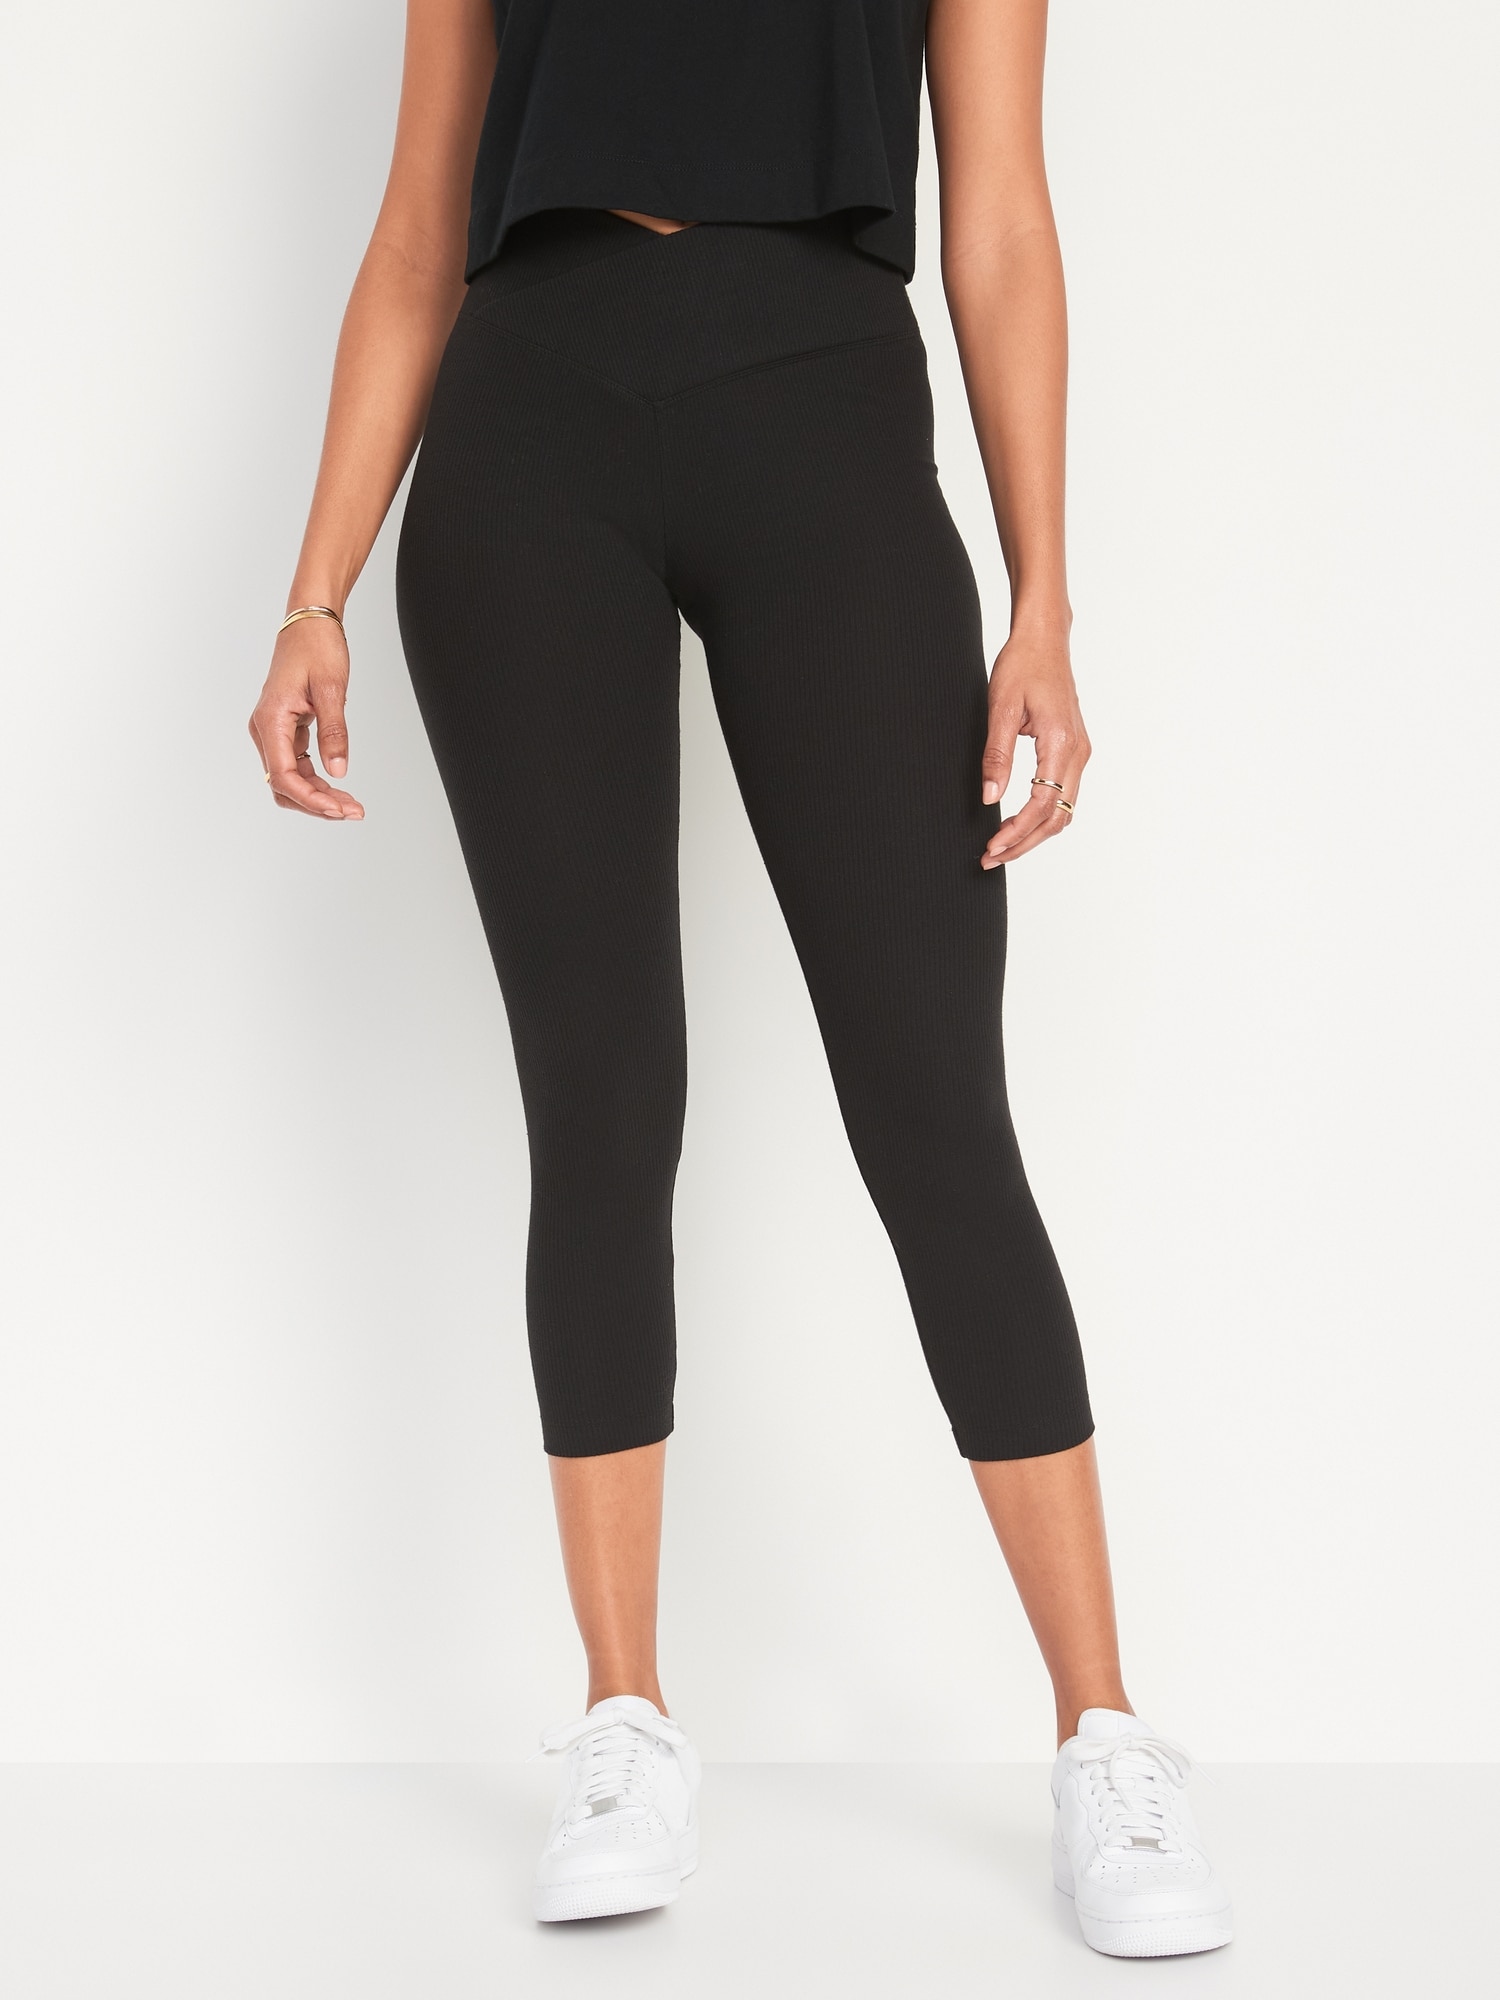 Funky Spring Season Stretchy Leggings – Mouse Humper